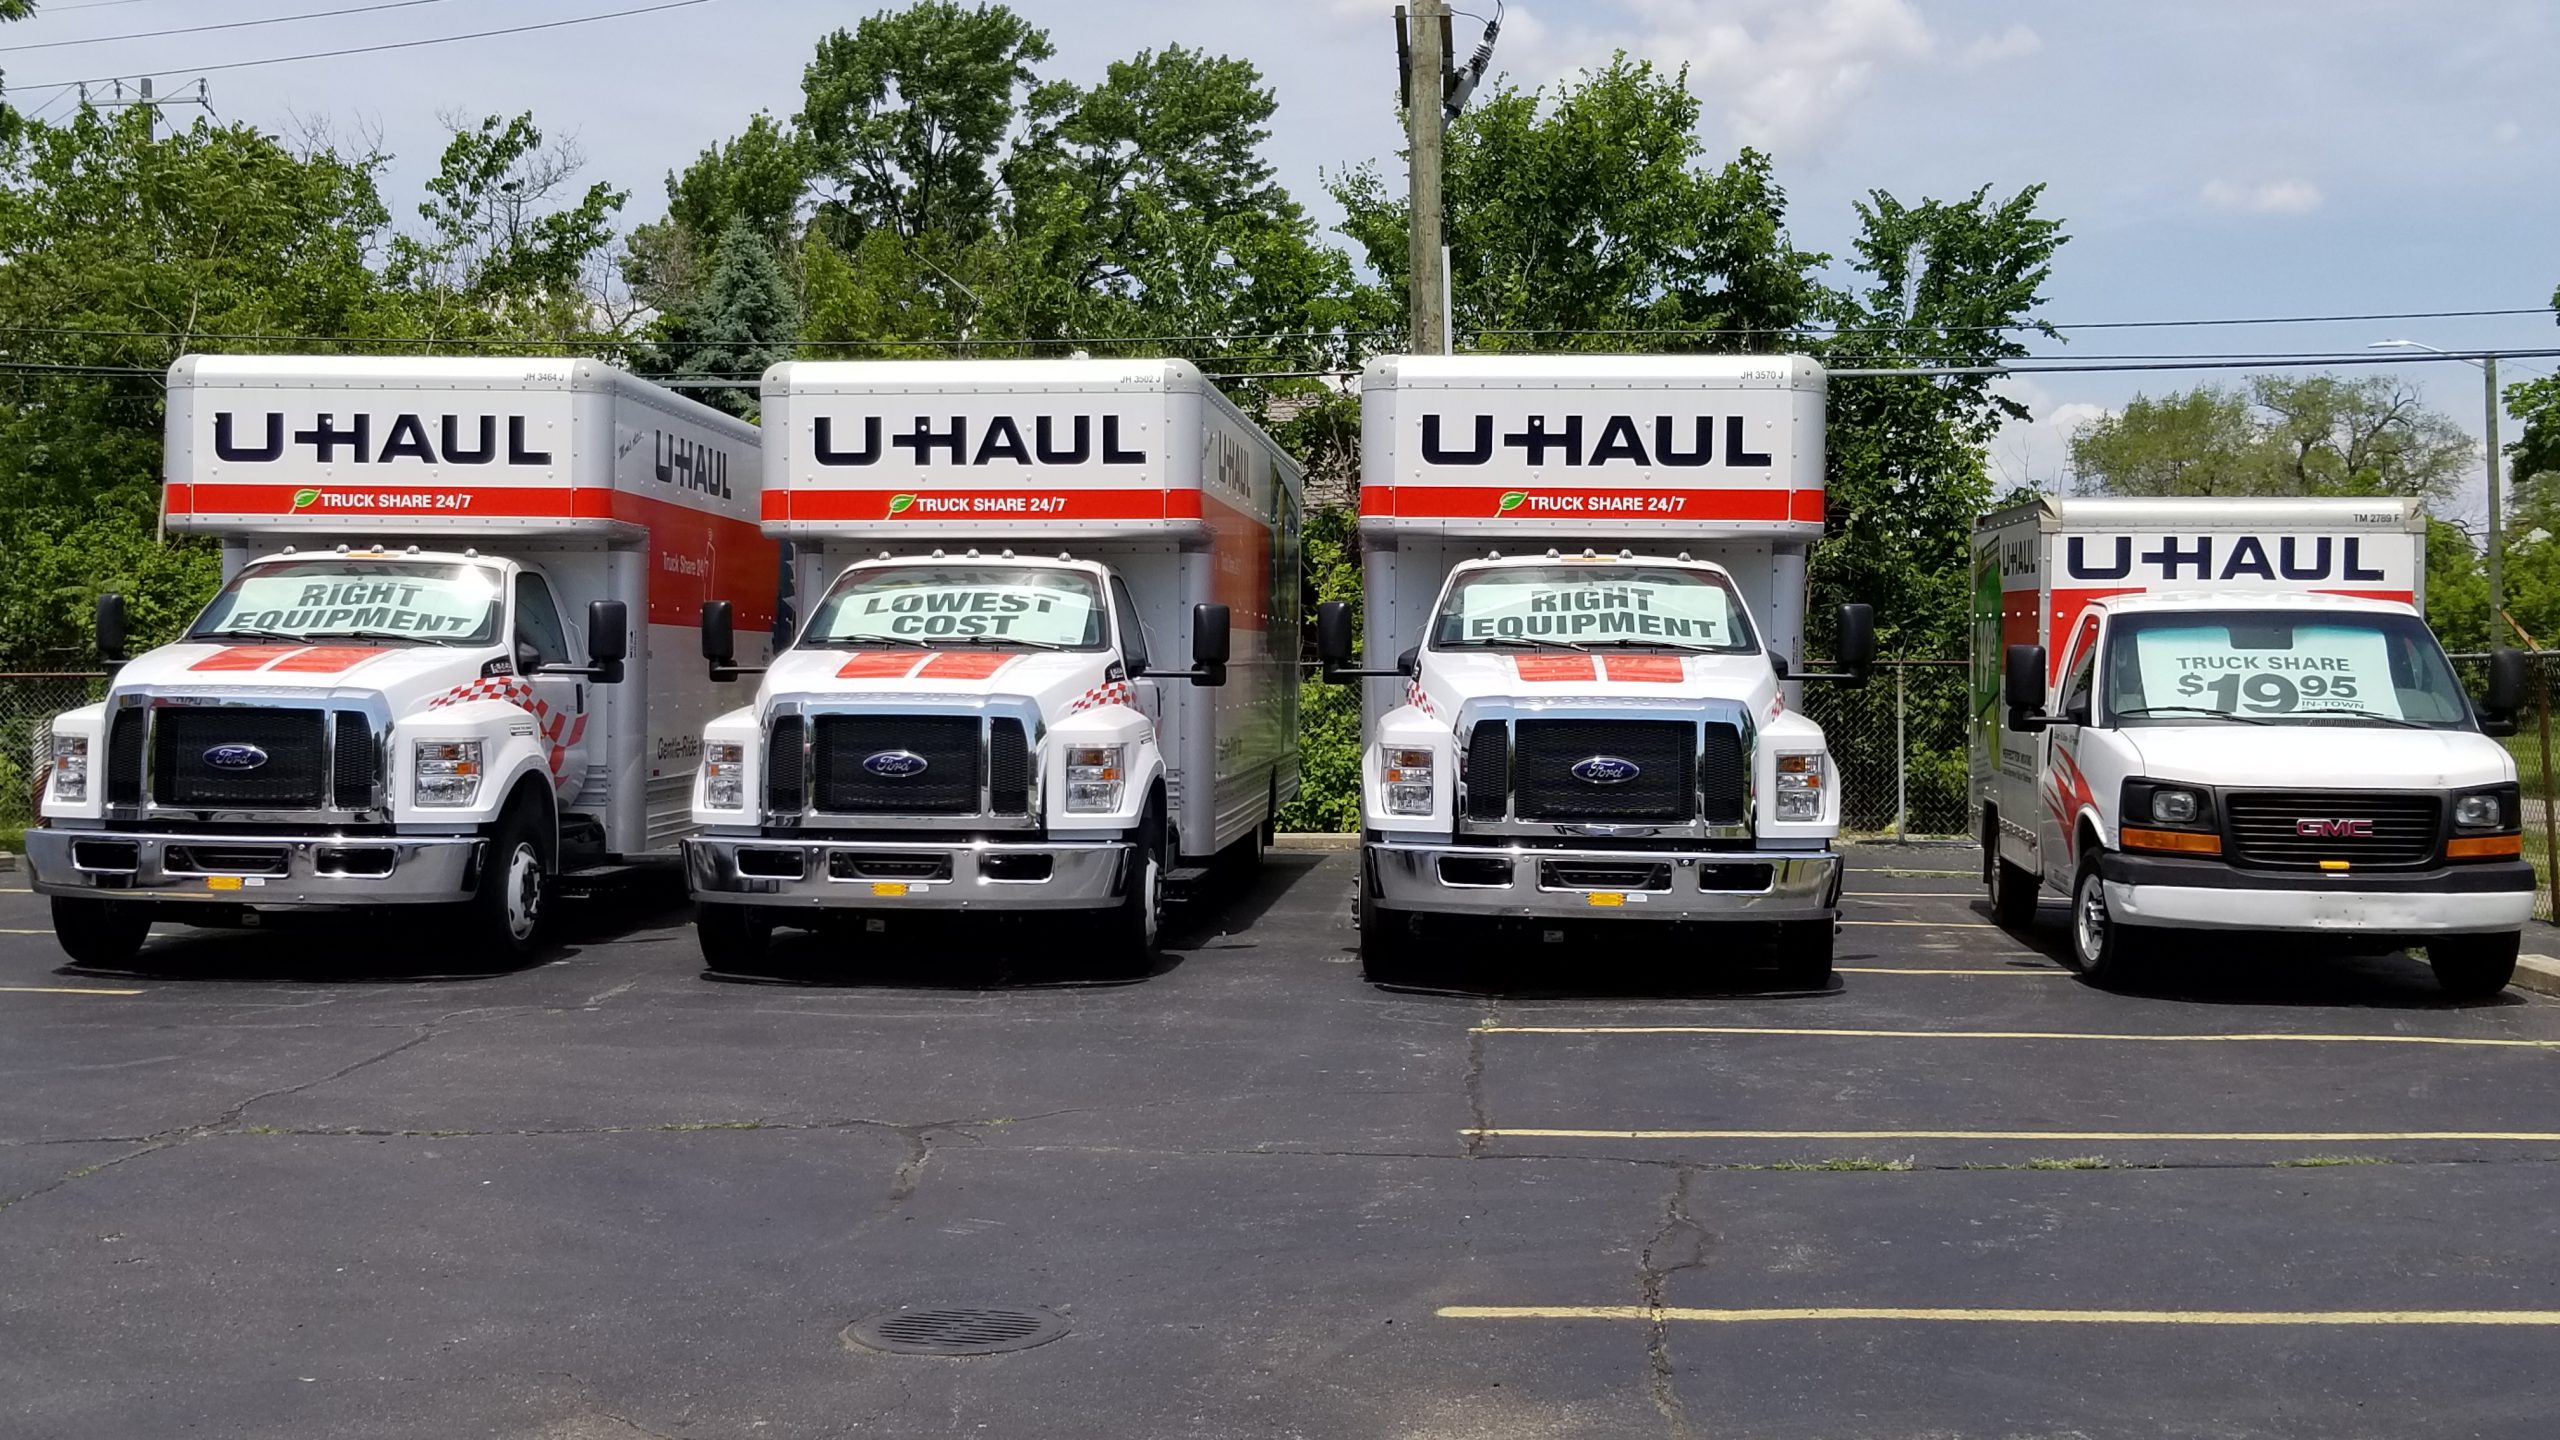 2020 Migration Trends: OHIO is the U-Haul No. 4 Growth State